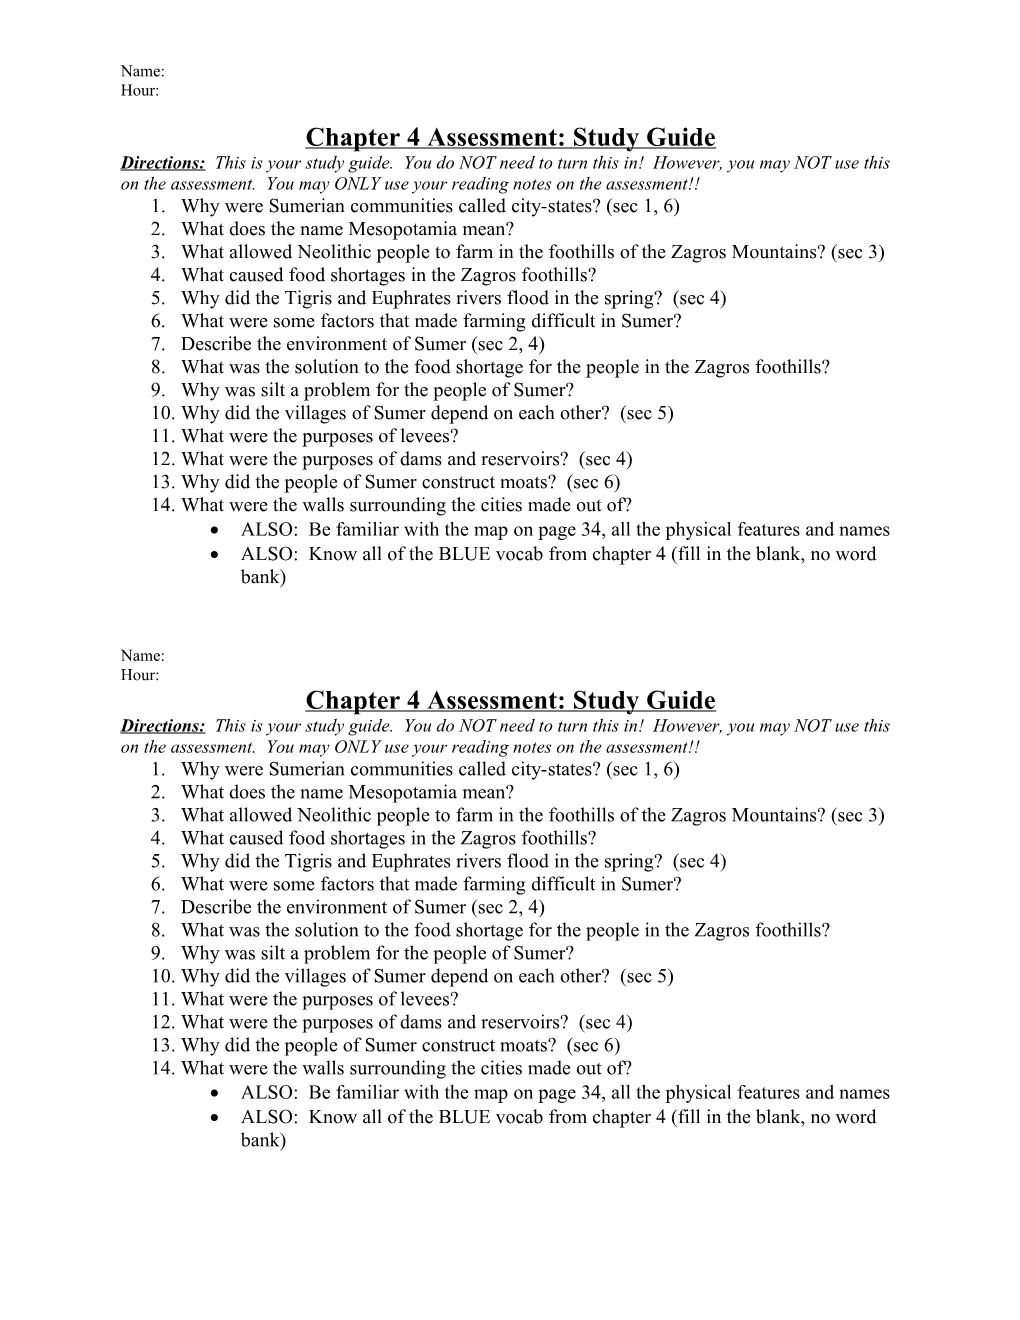 Chapter 4 Assessment: Study Guide